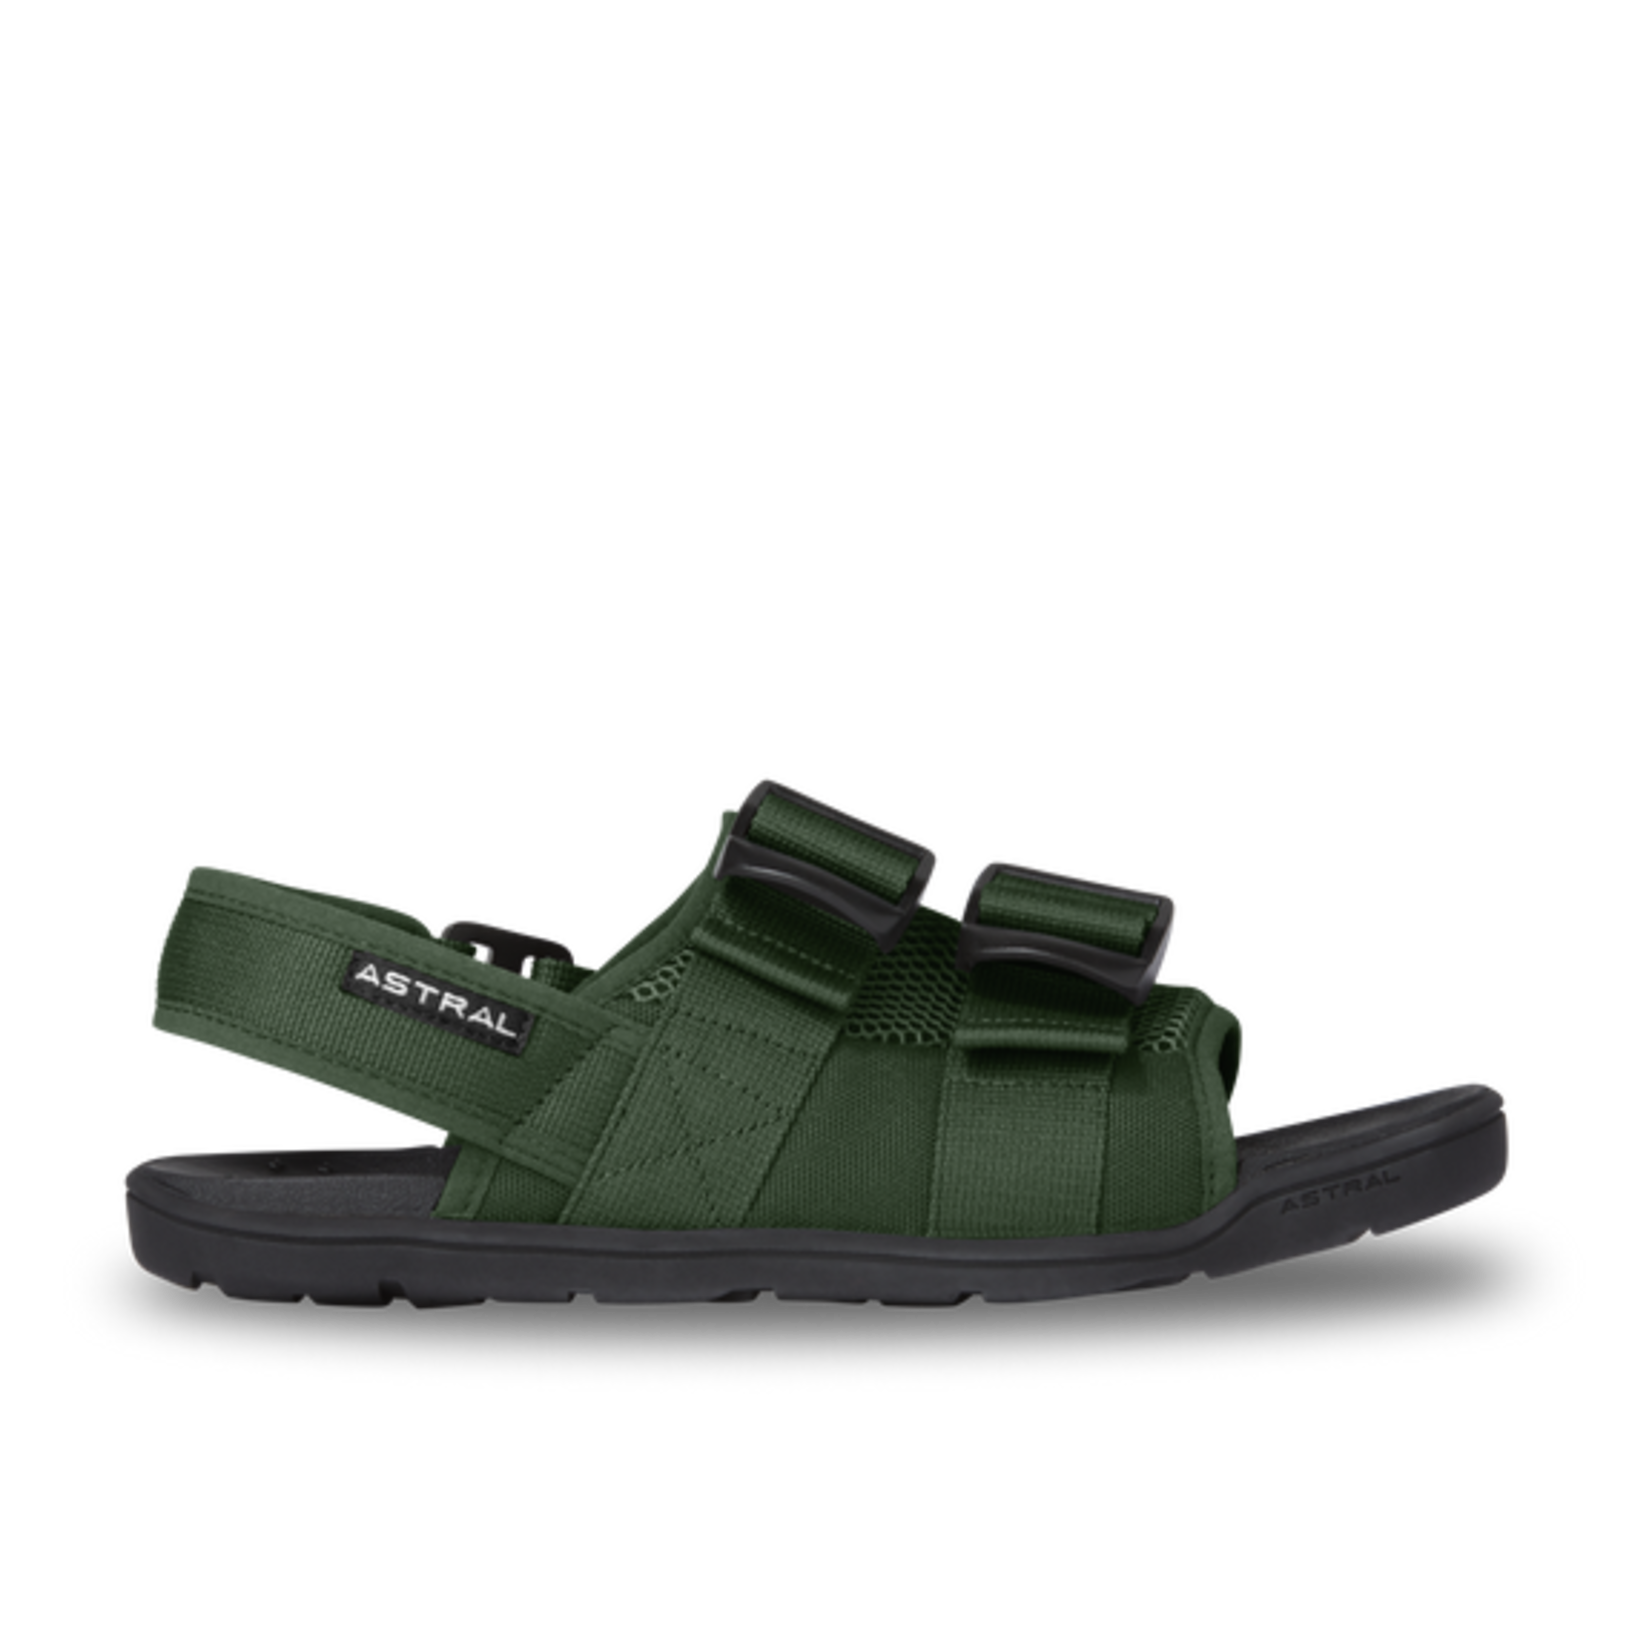 Astral Astral PFD Sandal W's